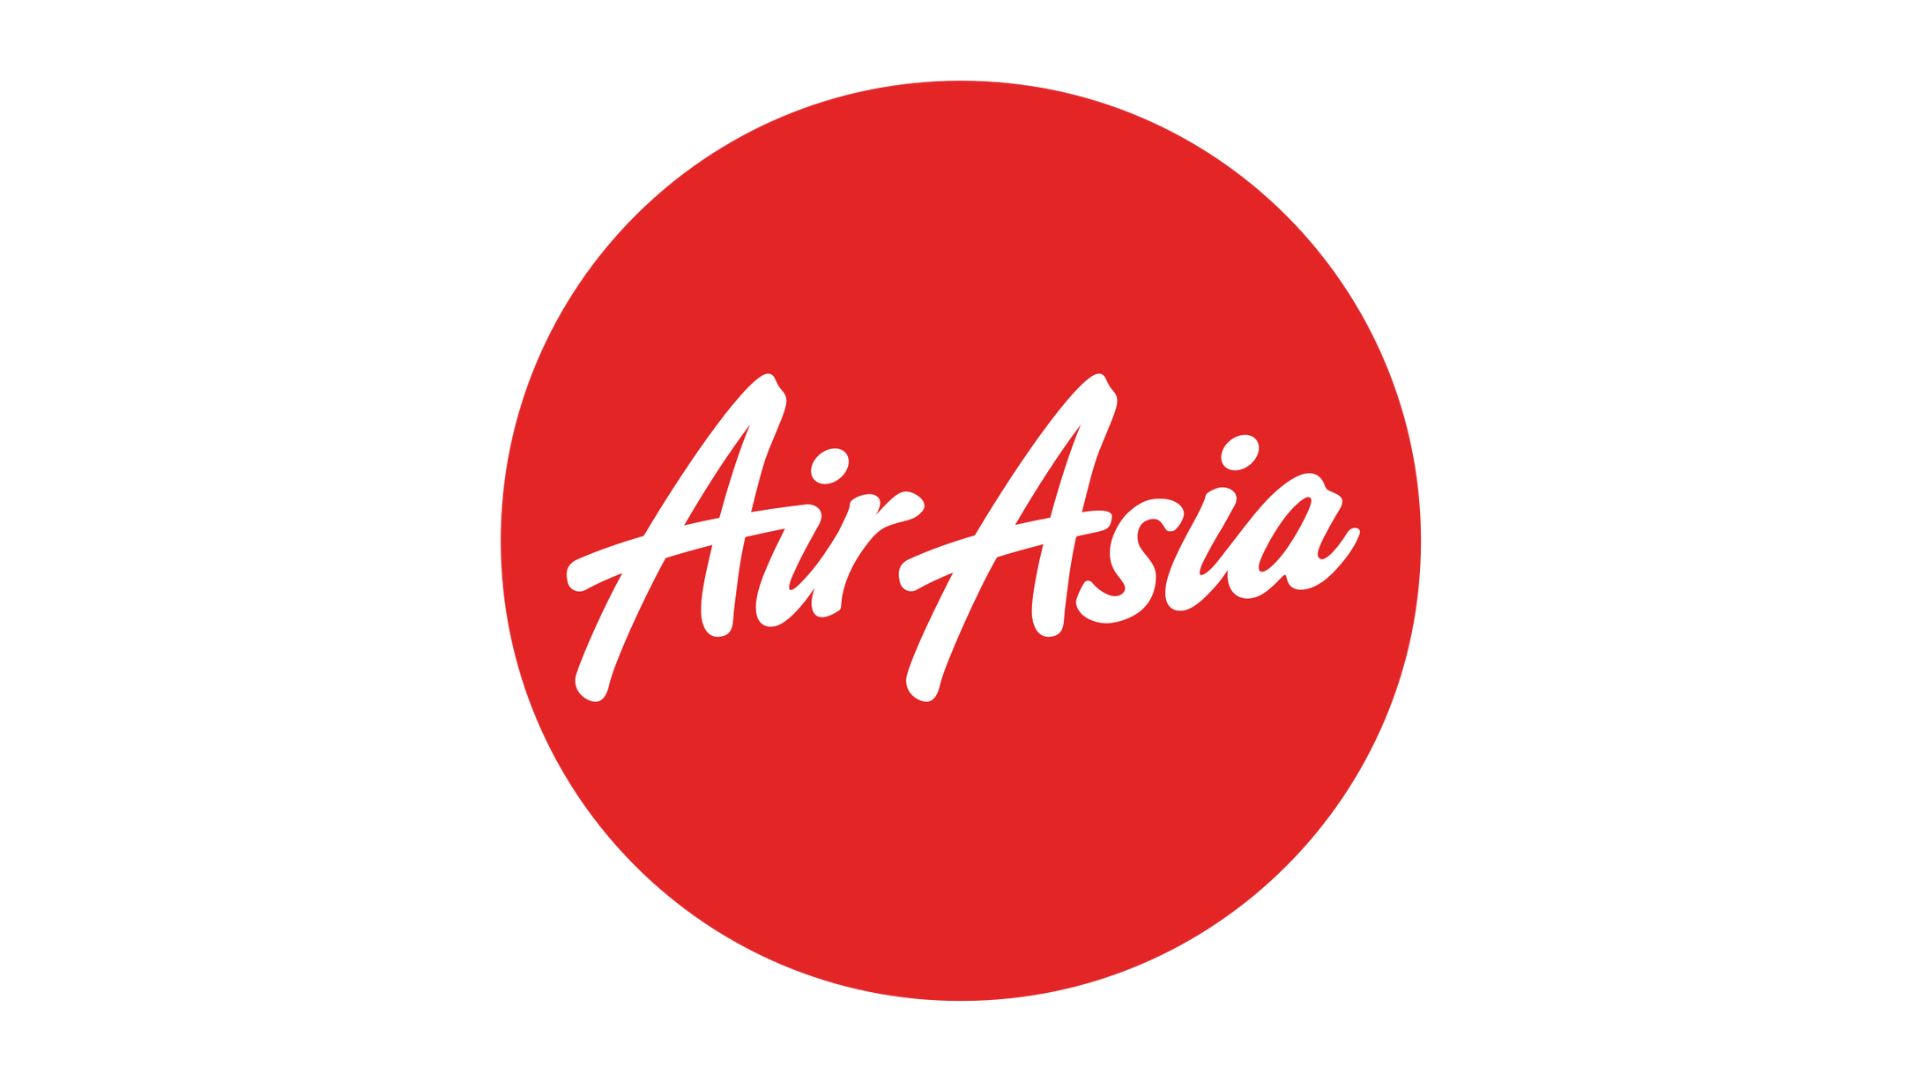 AirAsia affiliate program Malaysia is a good chance for beginners.